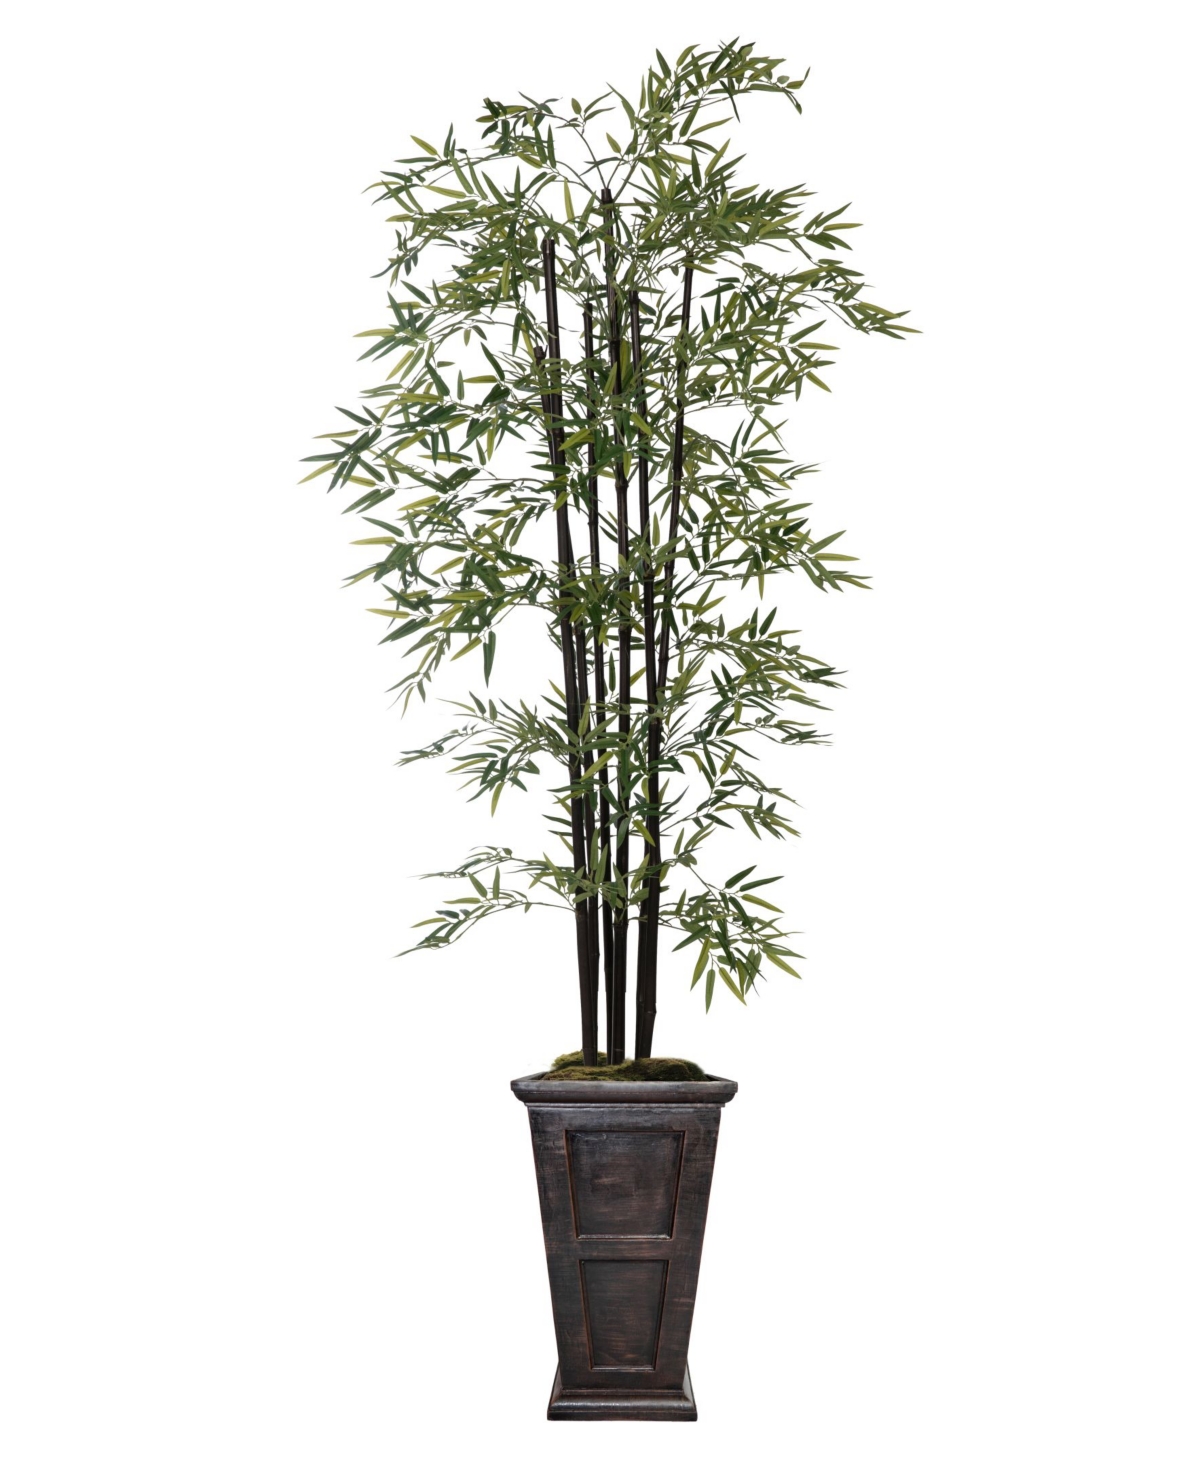 91" Tall Bamboo Tree With Decorative Black Poles and Fiberstone Planter - Green